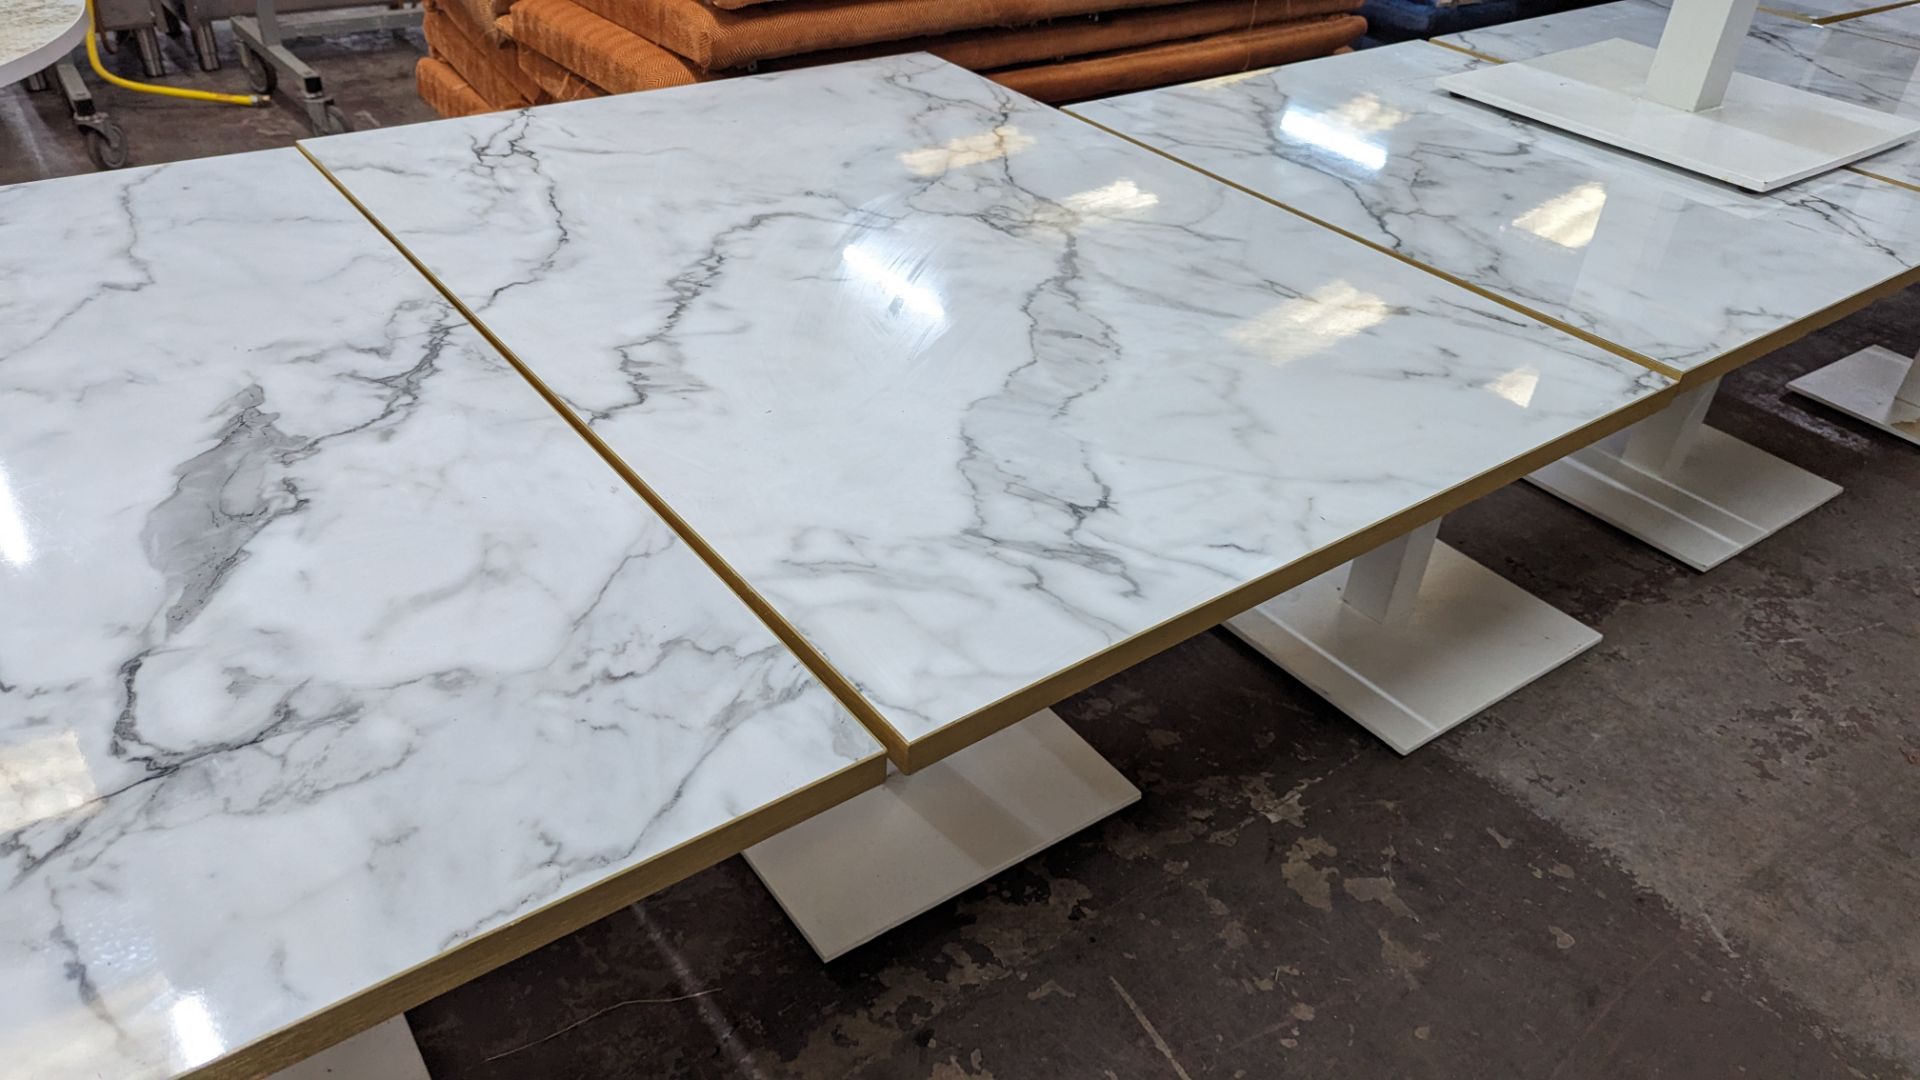 10 off matching dining tables in 3 different sizes with marble effect tops. 2 of the tables are ret - Image 4 of 19